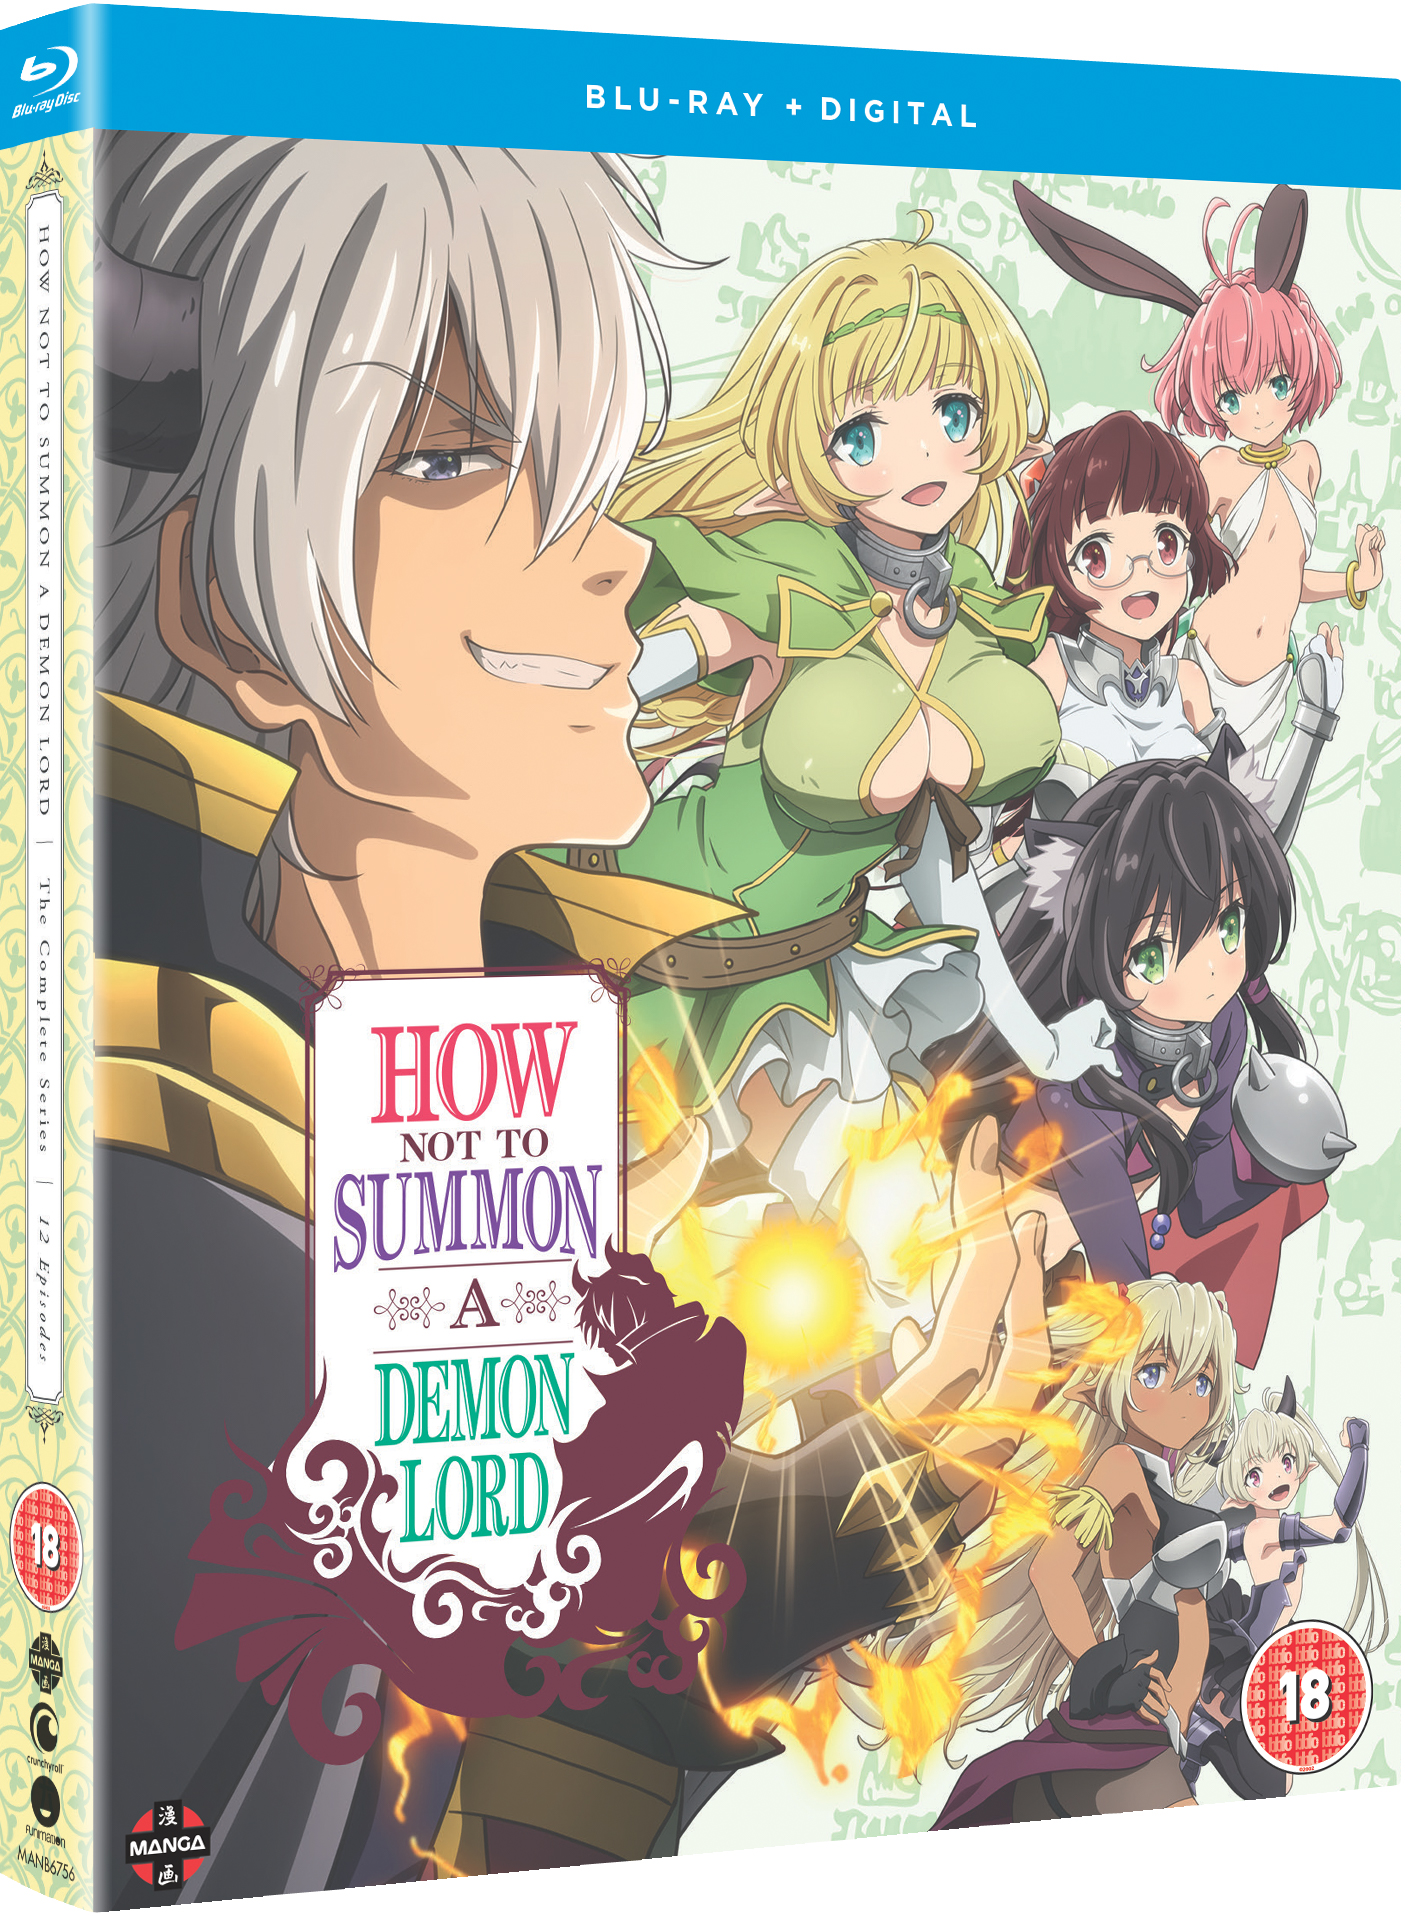 angela jeffrey recommends how to not summon a demon lord porn pic